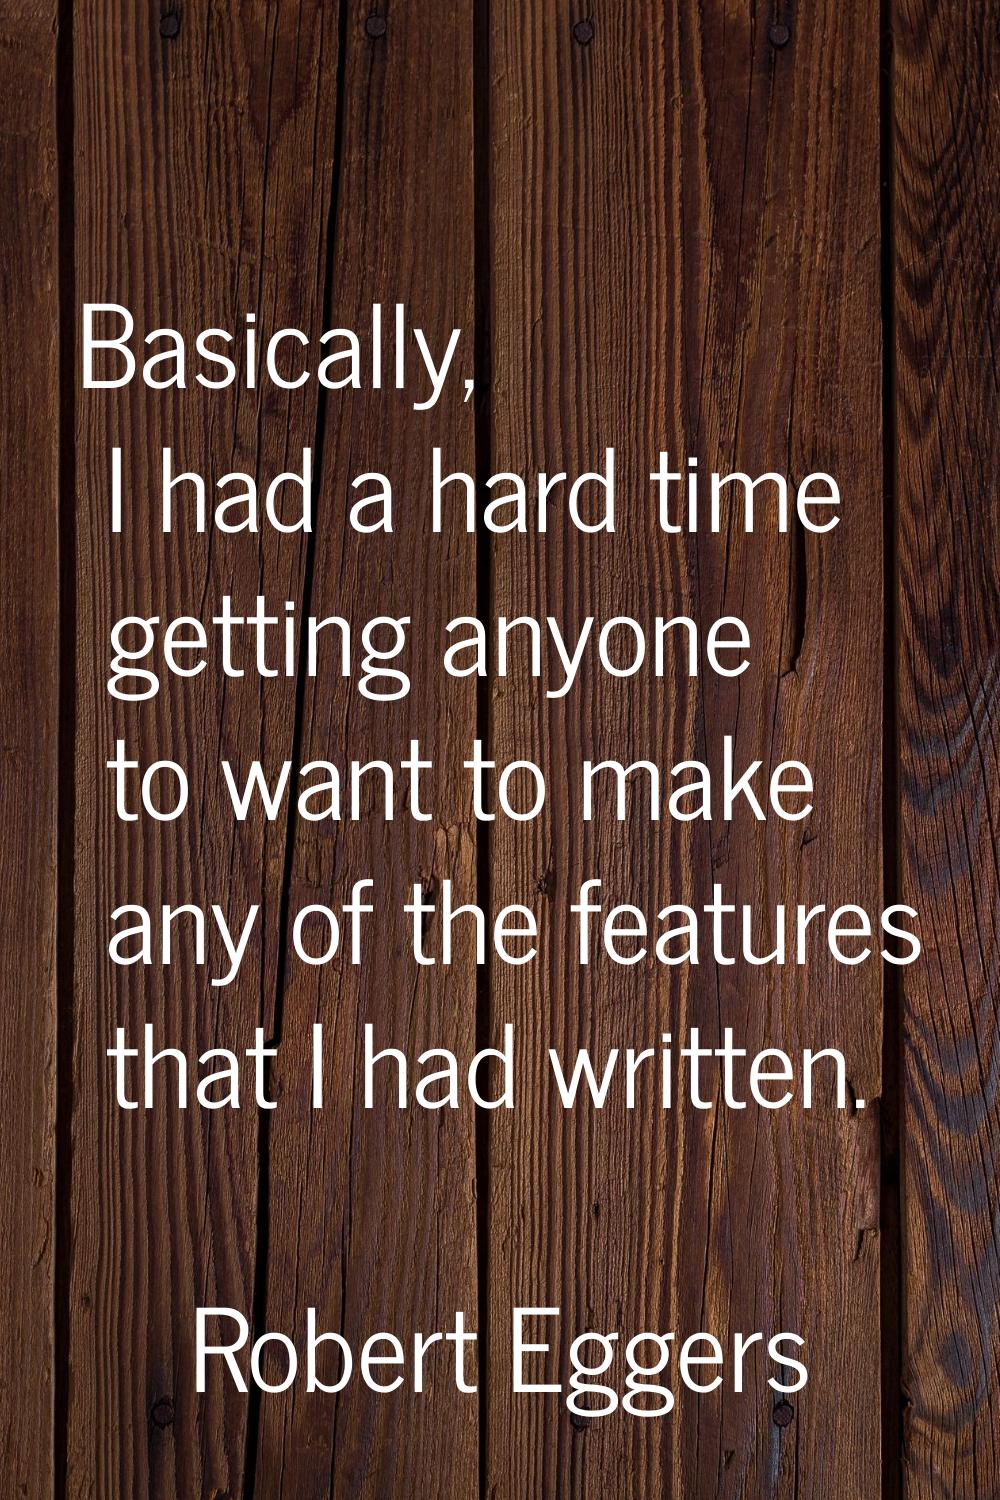 Basically, I had a hard time getting anyone to want to make any of the features that I had written.